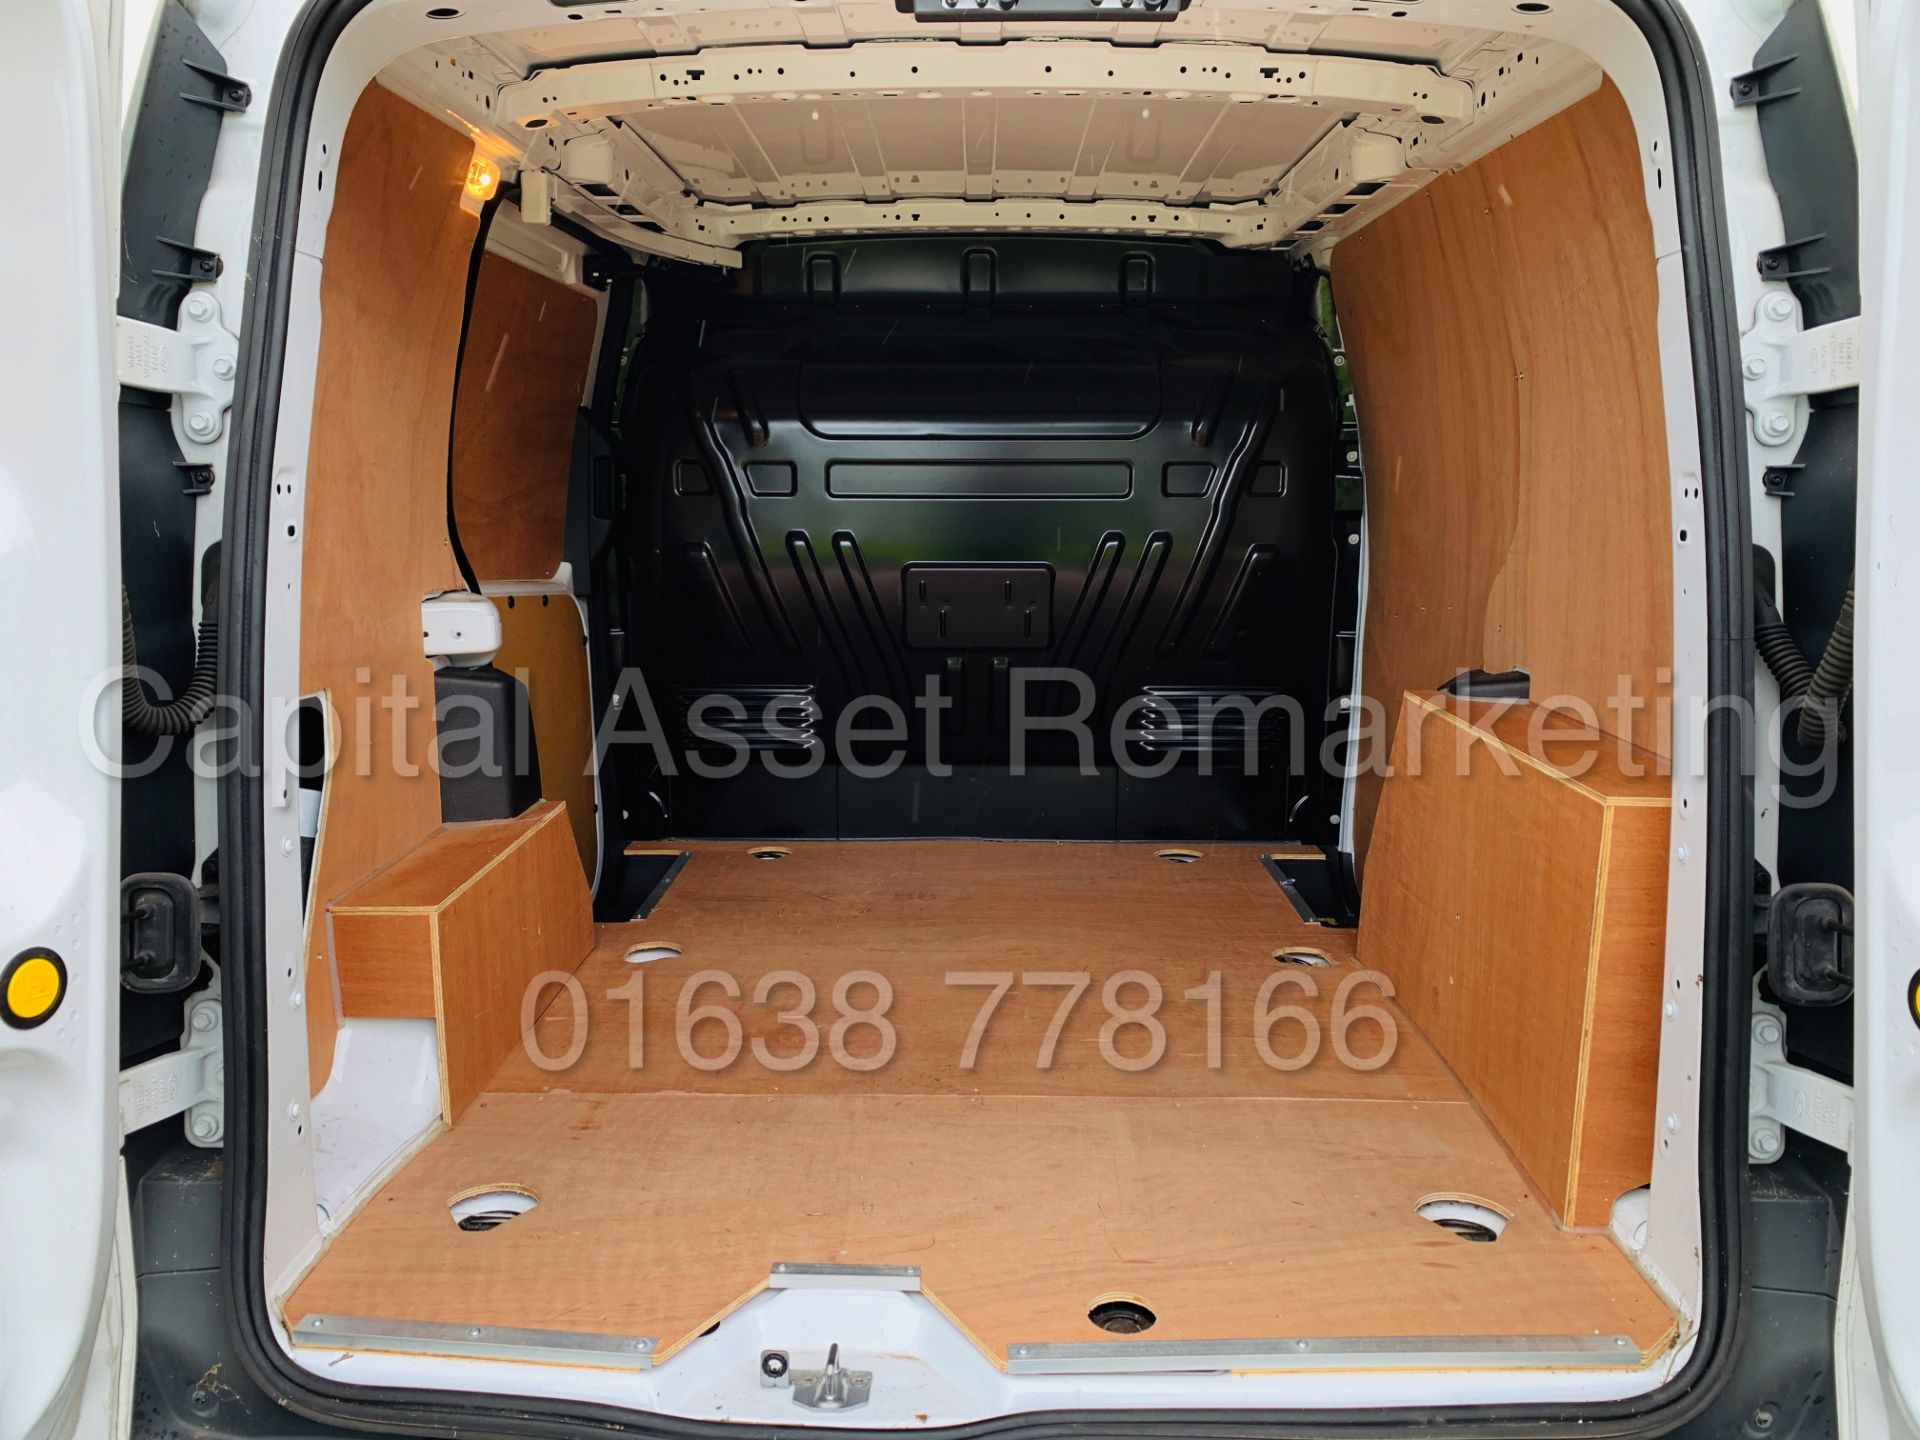 Ford Transit CONNECT 75 T200 *SWB - PANEL VAN* (2018 MODEL) '1.5 TDCI - EURO 6 COMPLIANT' (1 OWNER) - Image 23 of 36